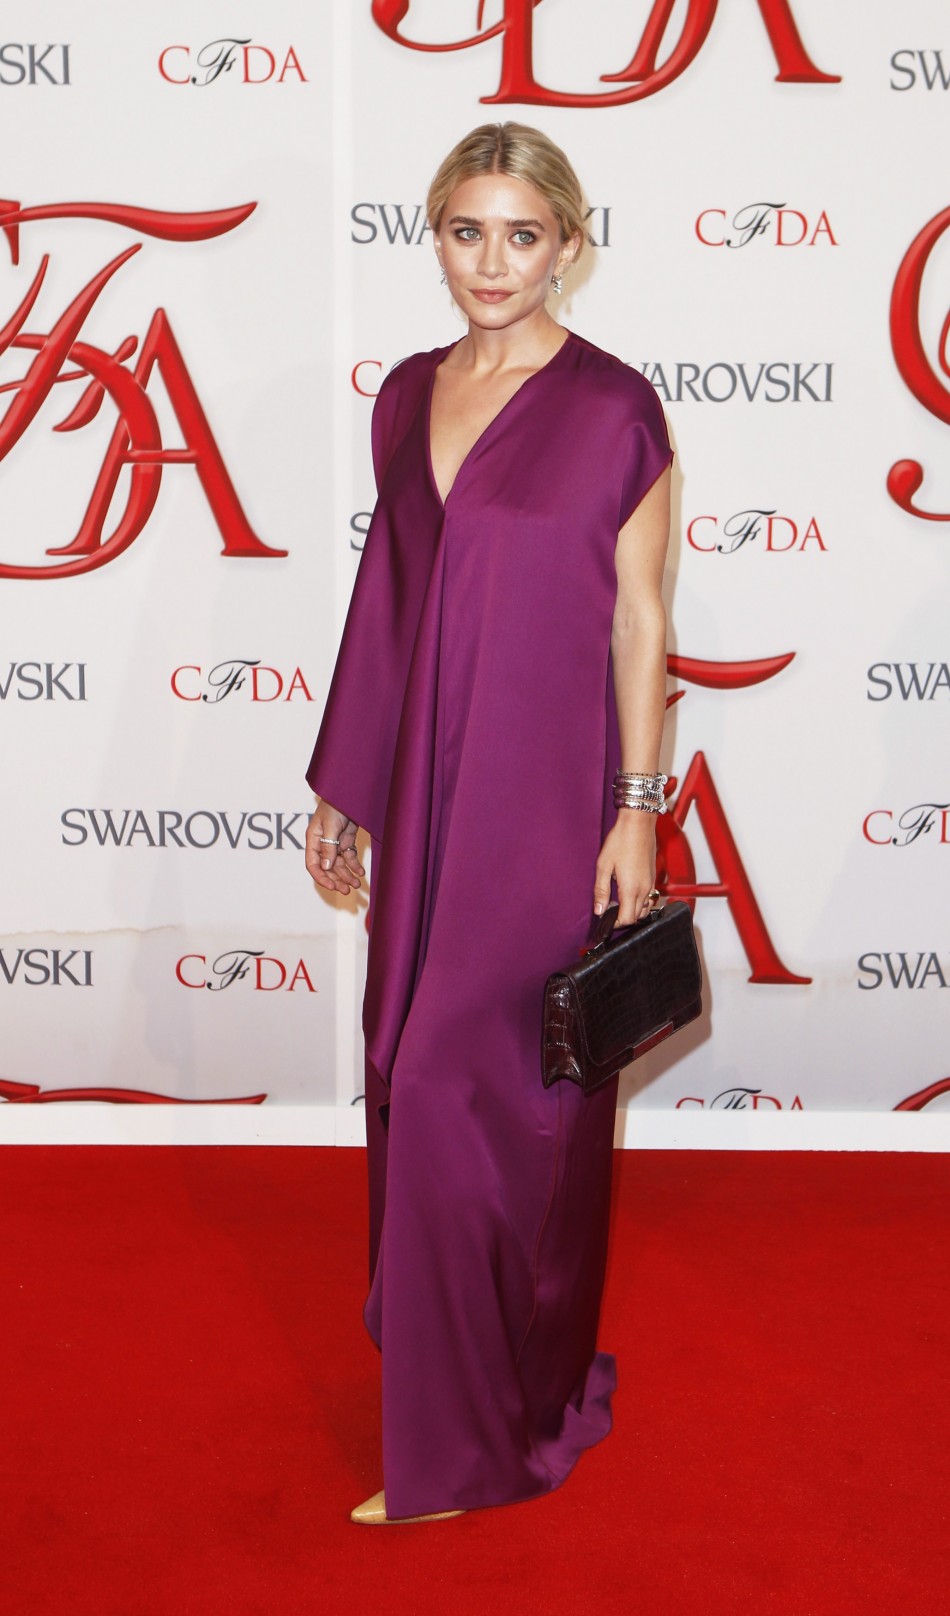 Actress and designer Ashley Olsen arrives to attend the 2012 CFDA Fashion Awards in New York